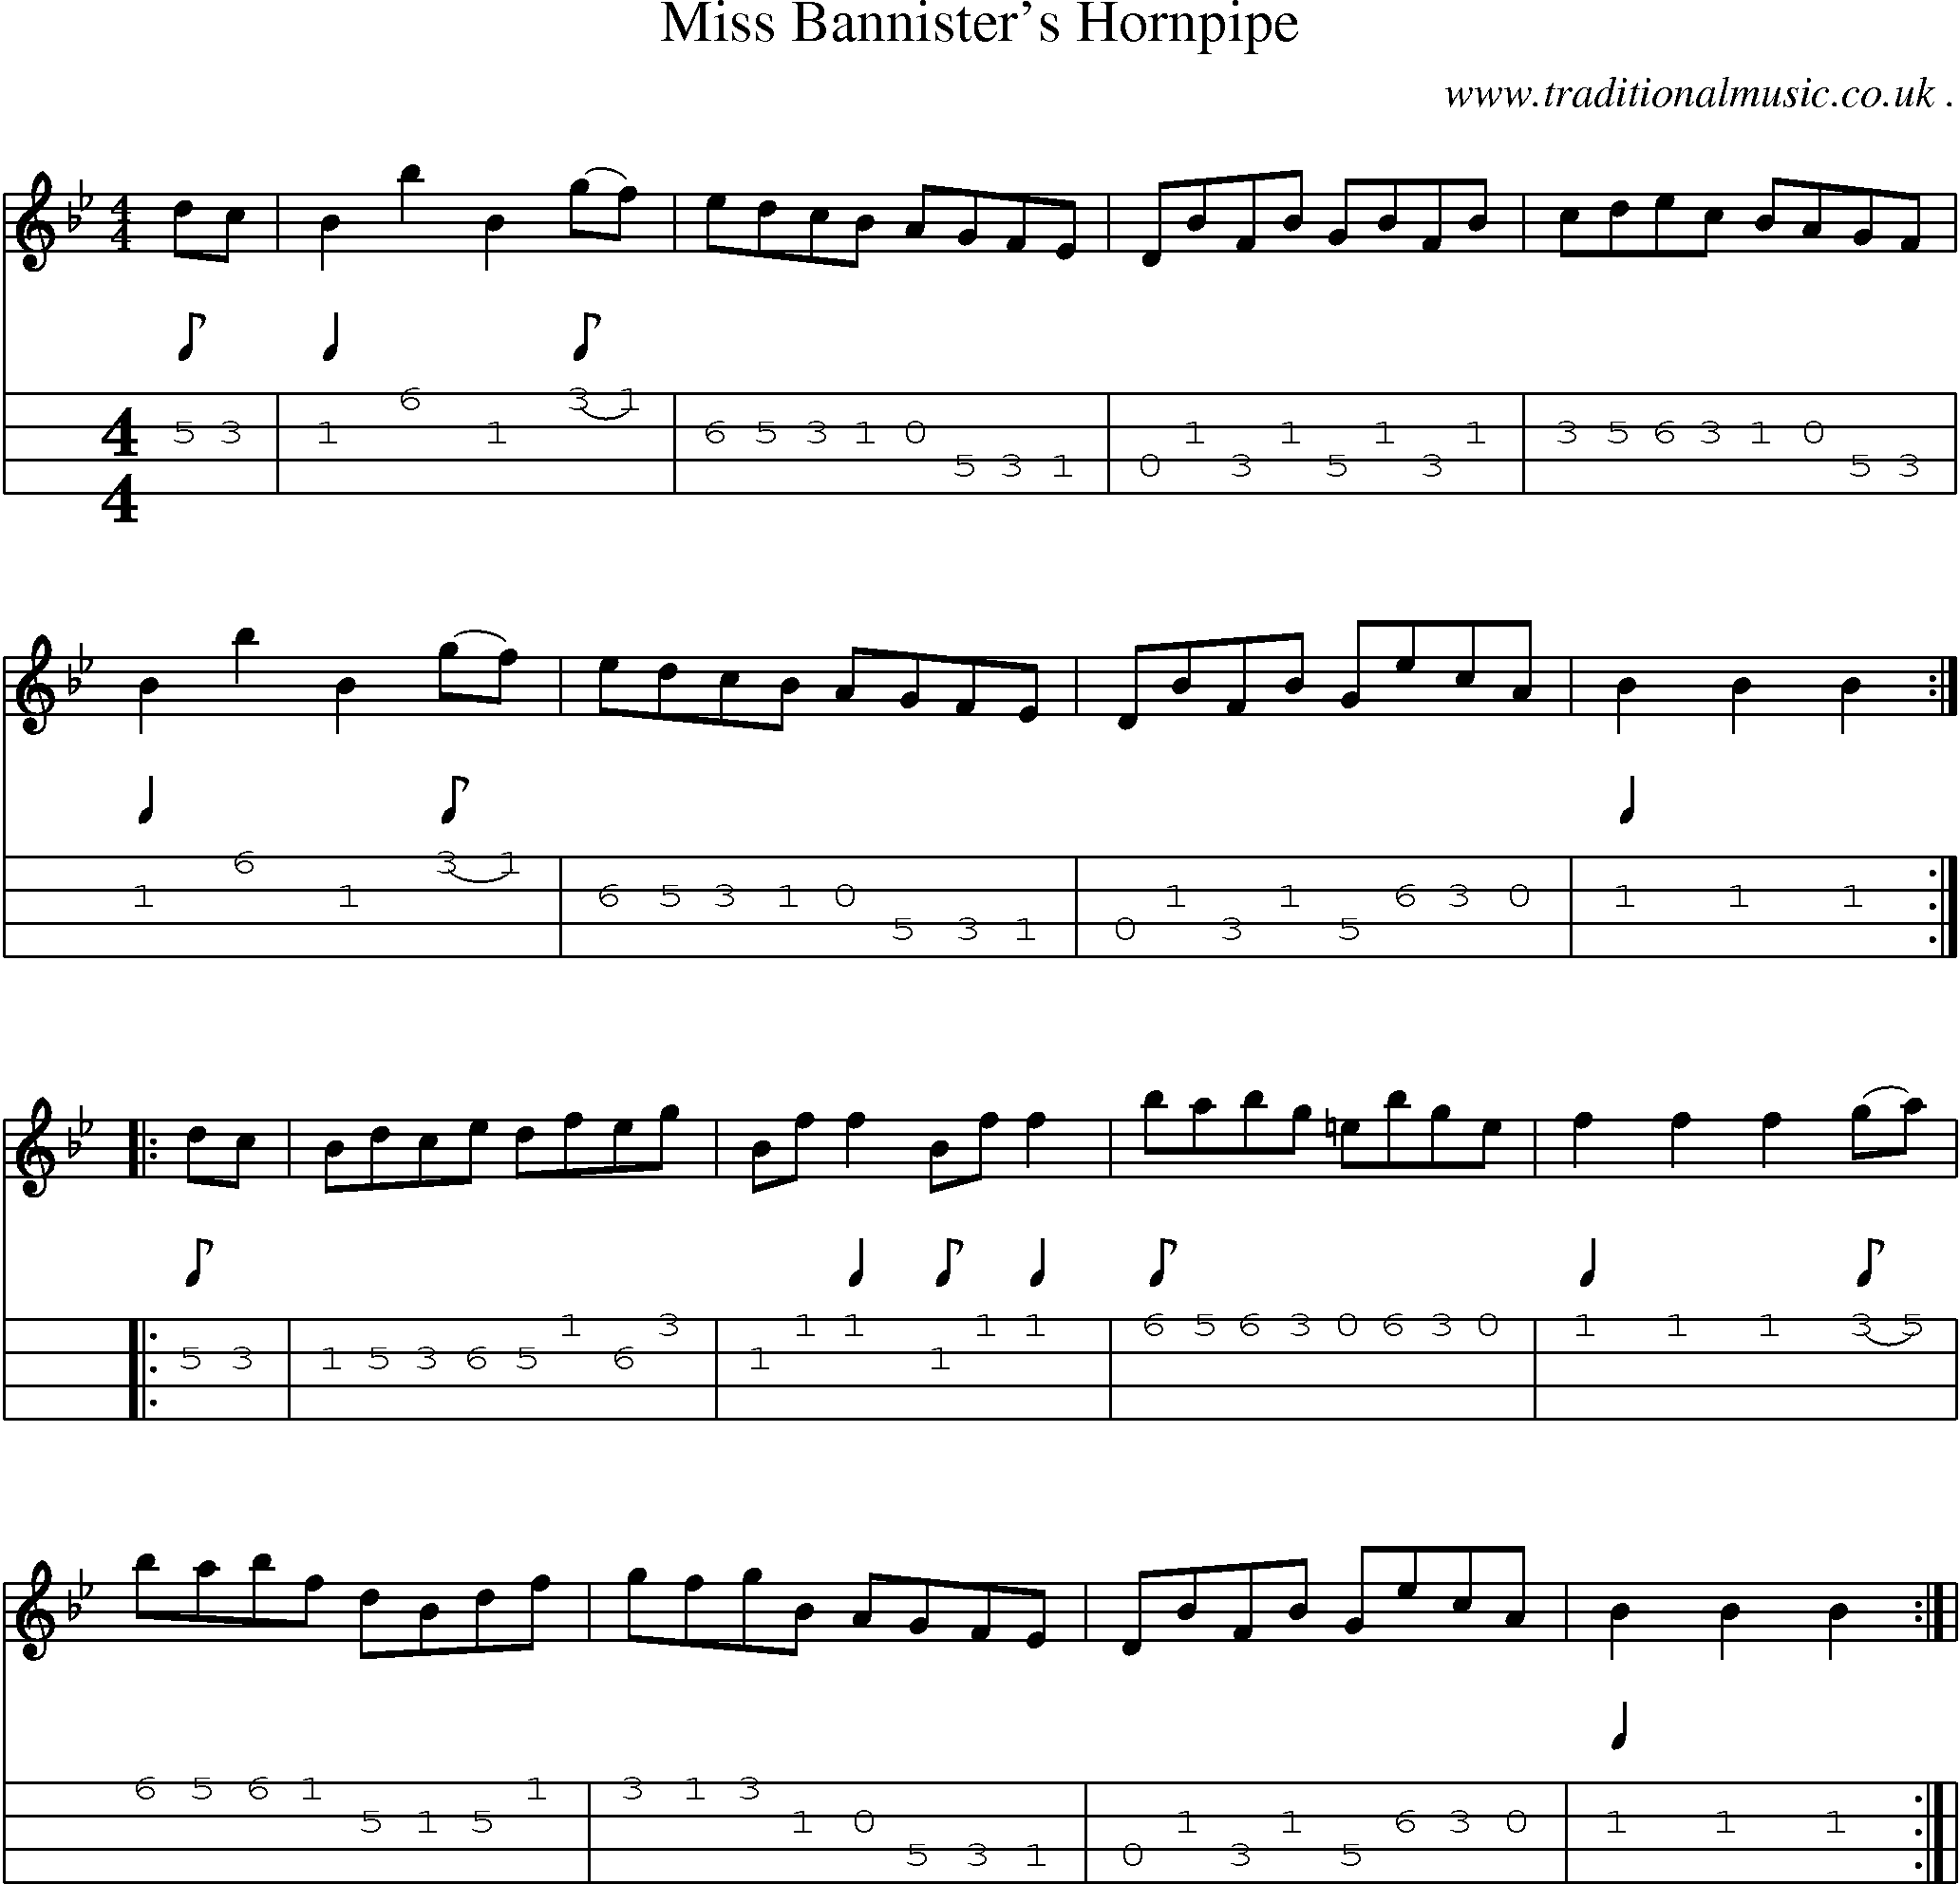 Sheet-Music and Mandolin Tabs for Miss Bannisters Hornpipe